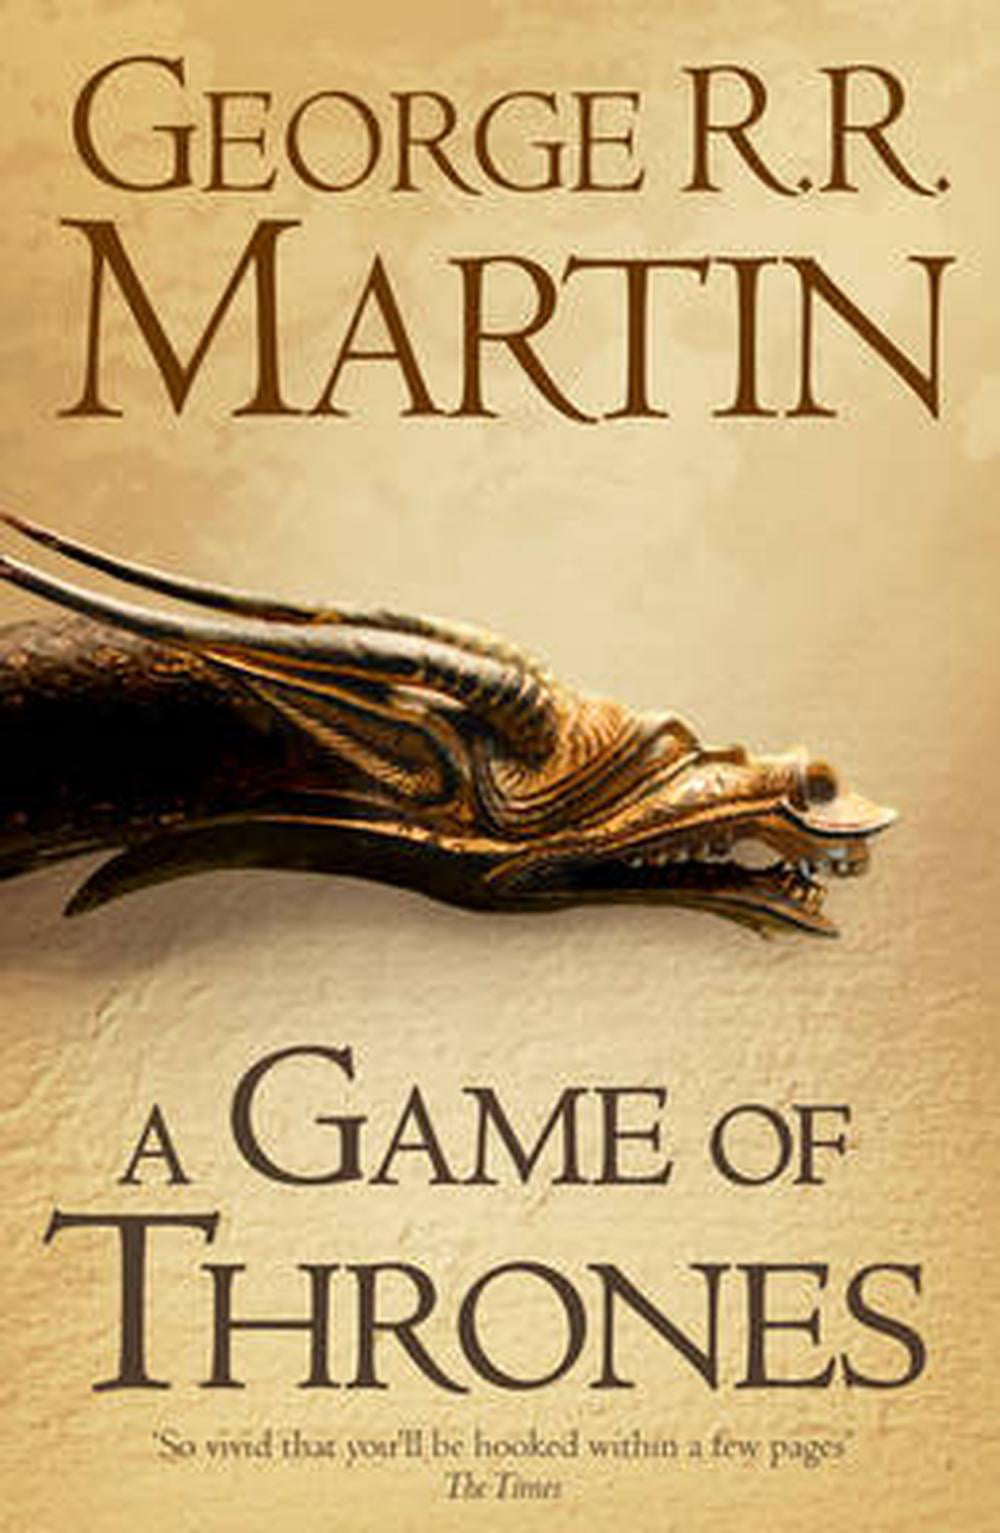 A Game of Thrones, A Song of Fire and Ice Series: Book 1